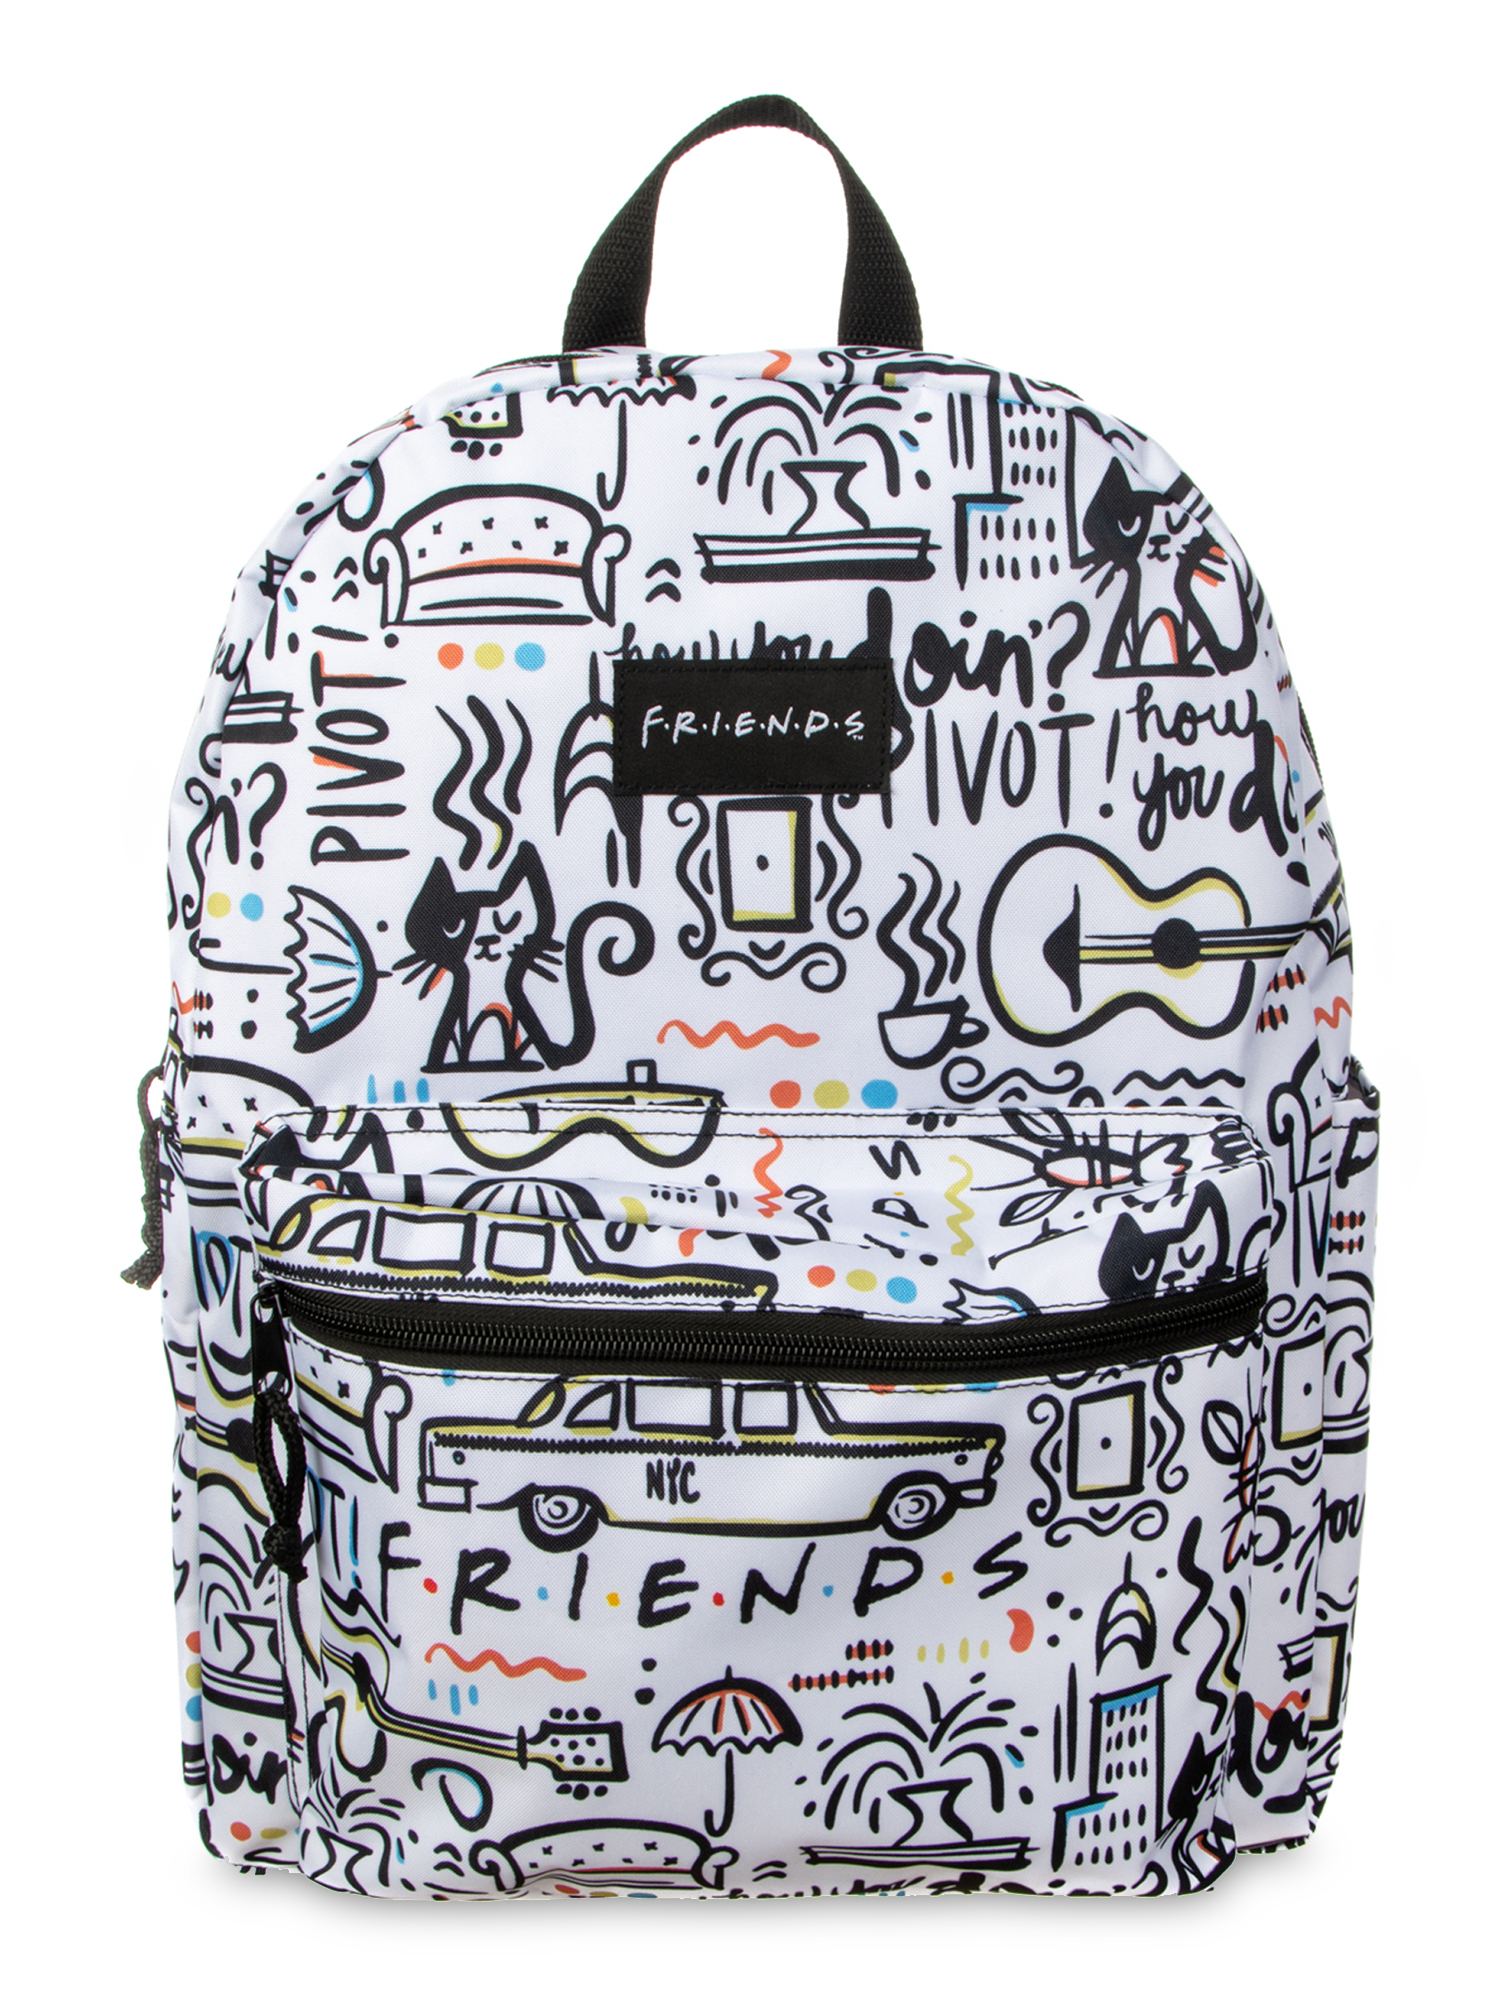 Friends Backpack - image 1 of 3